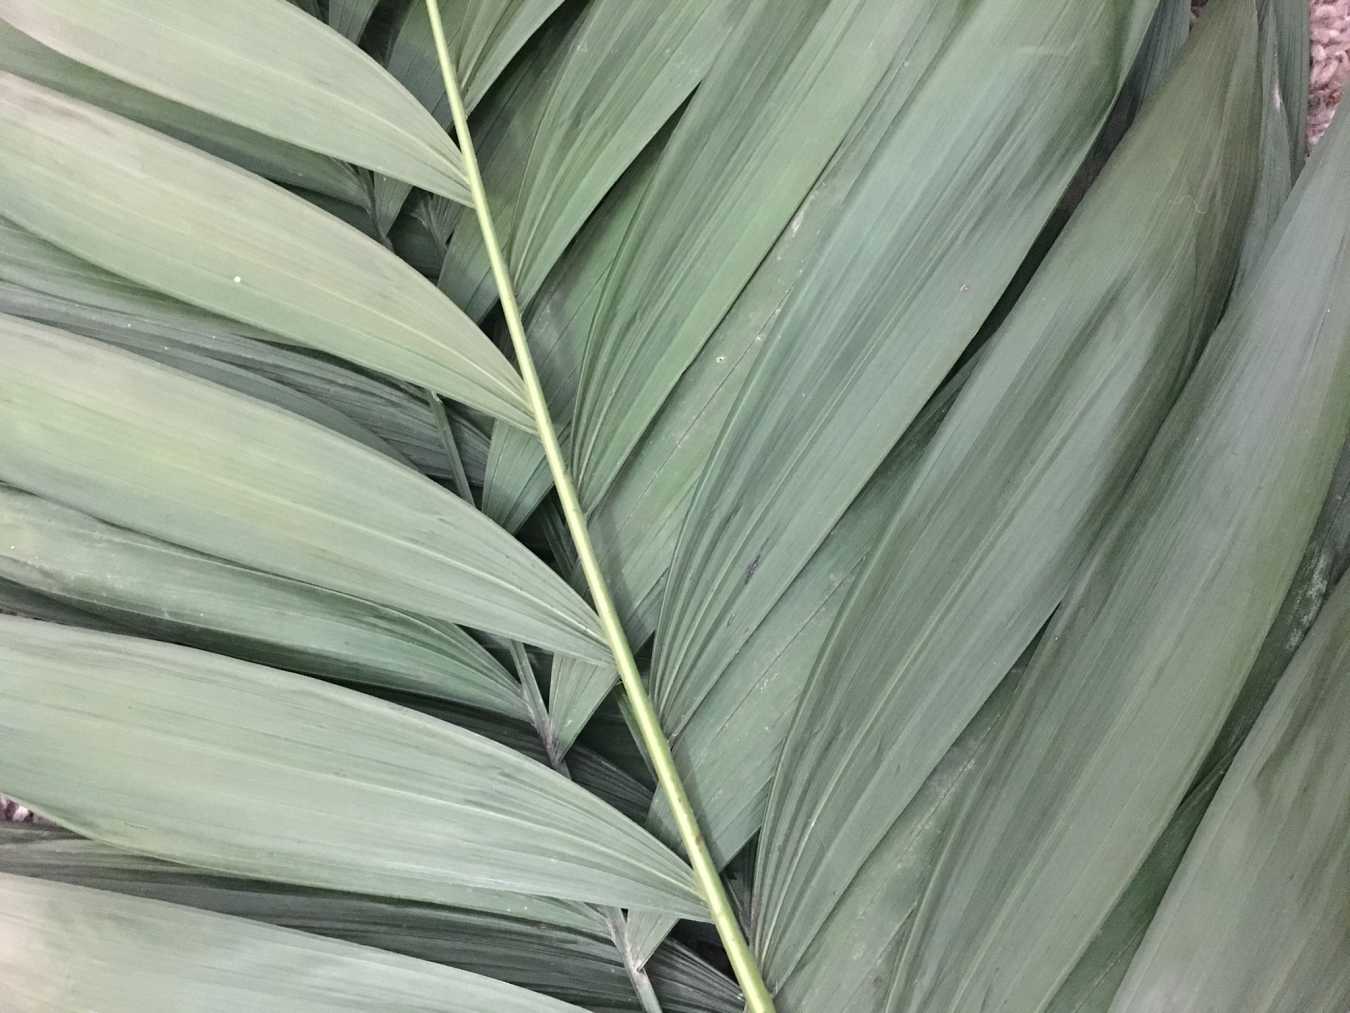 More Than Palms – reflection and Palm Sunday litany